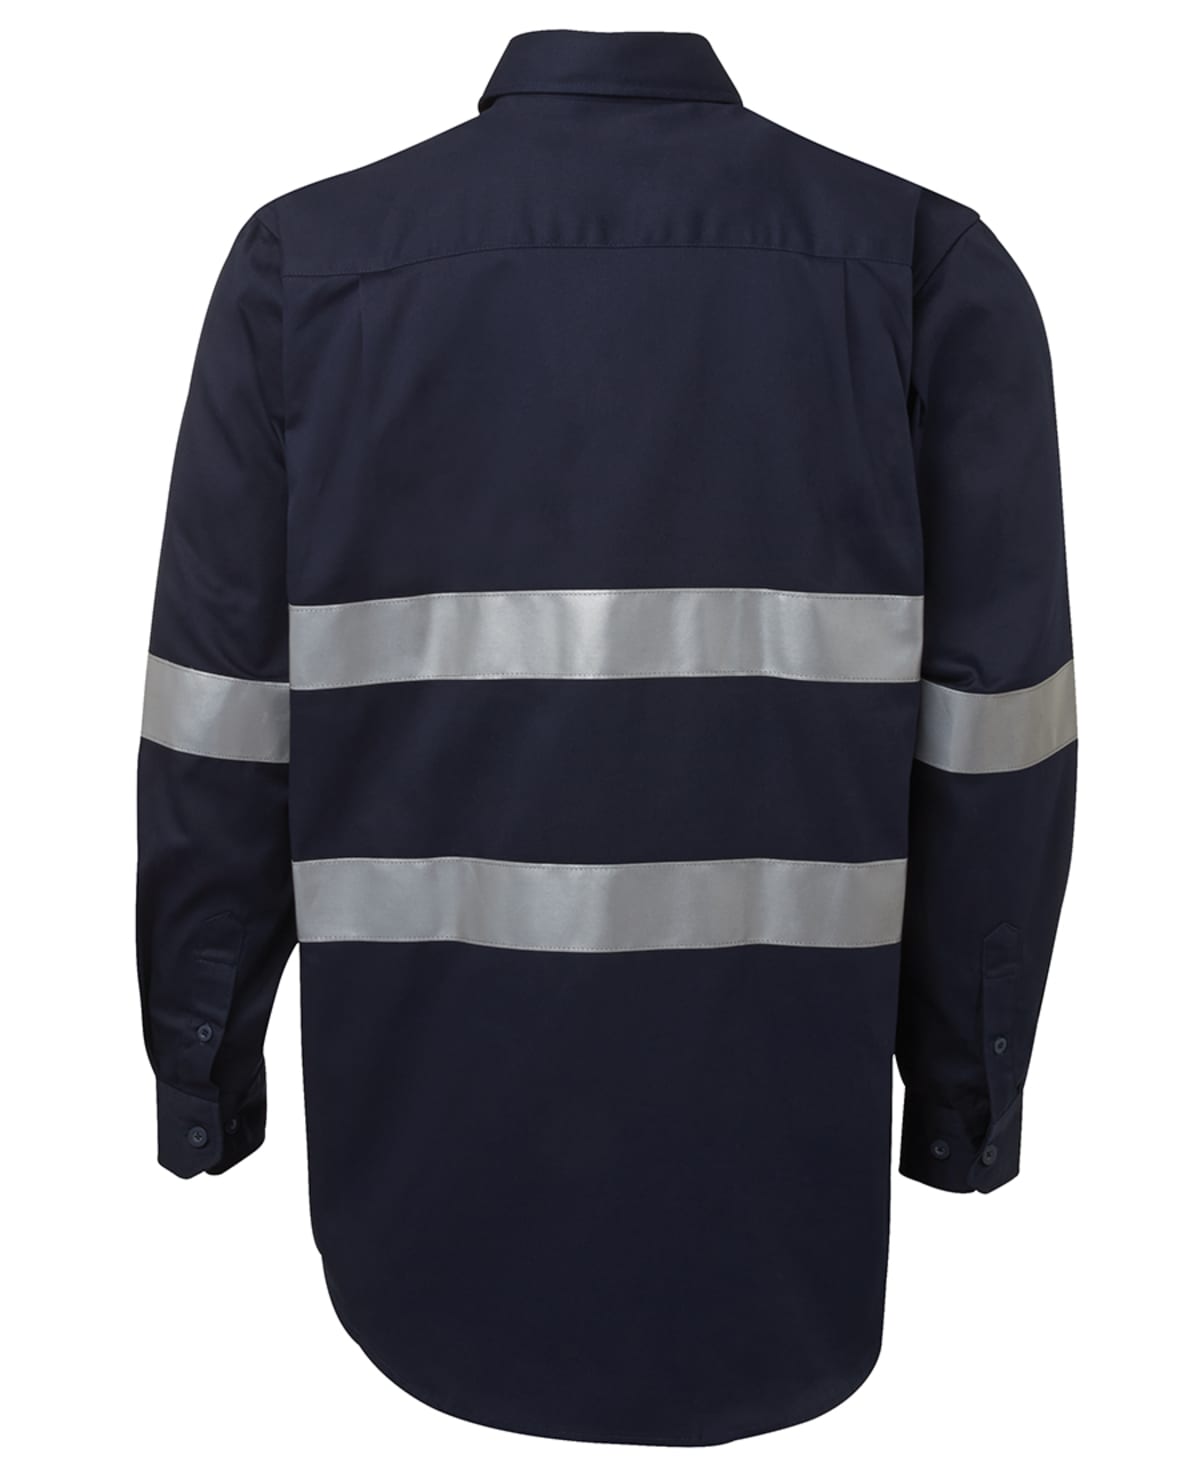 JB's L/S 190G Work Shirt With Reflective Tape